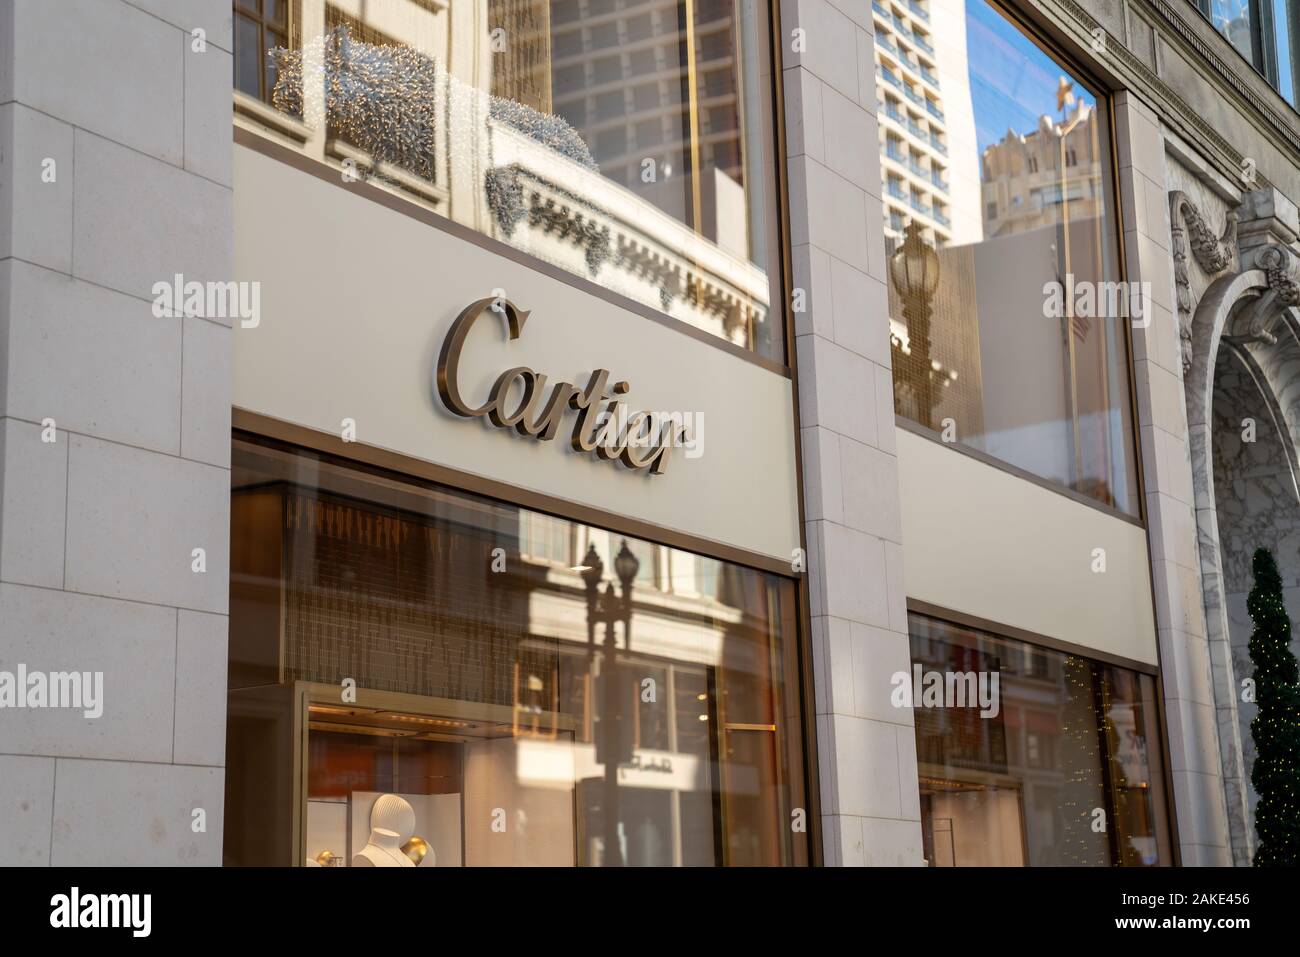 Cartier designer jewelry store location in San Francisco downtown shopping district Stock Photo